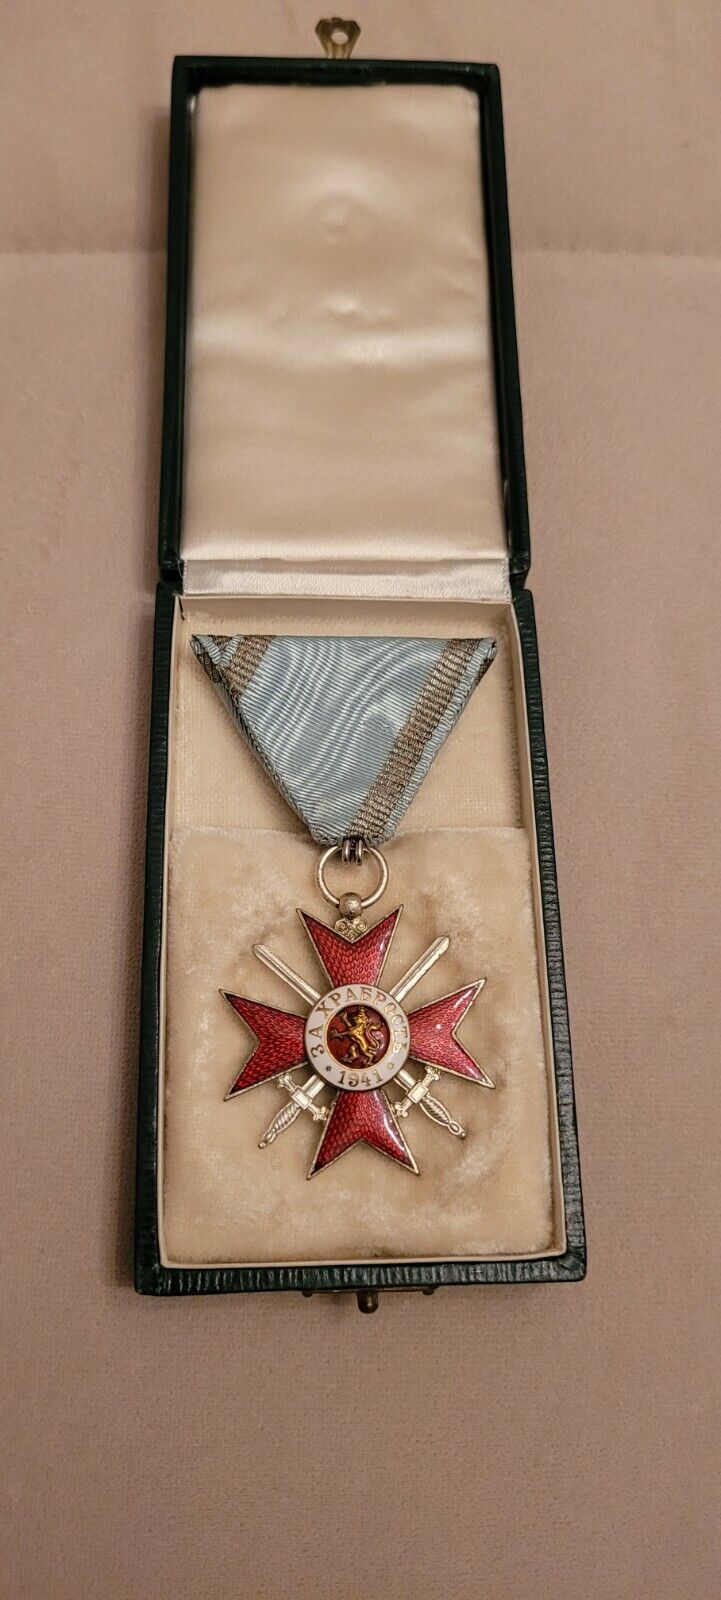 BULGARIA Order for Courage in Wartime (Military Bravery Order)